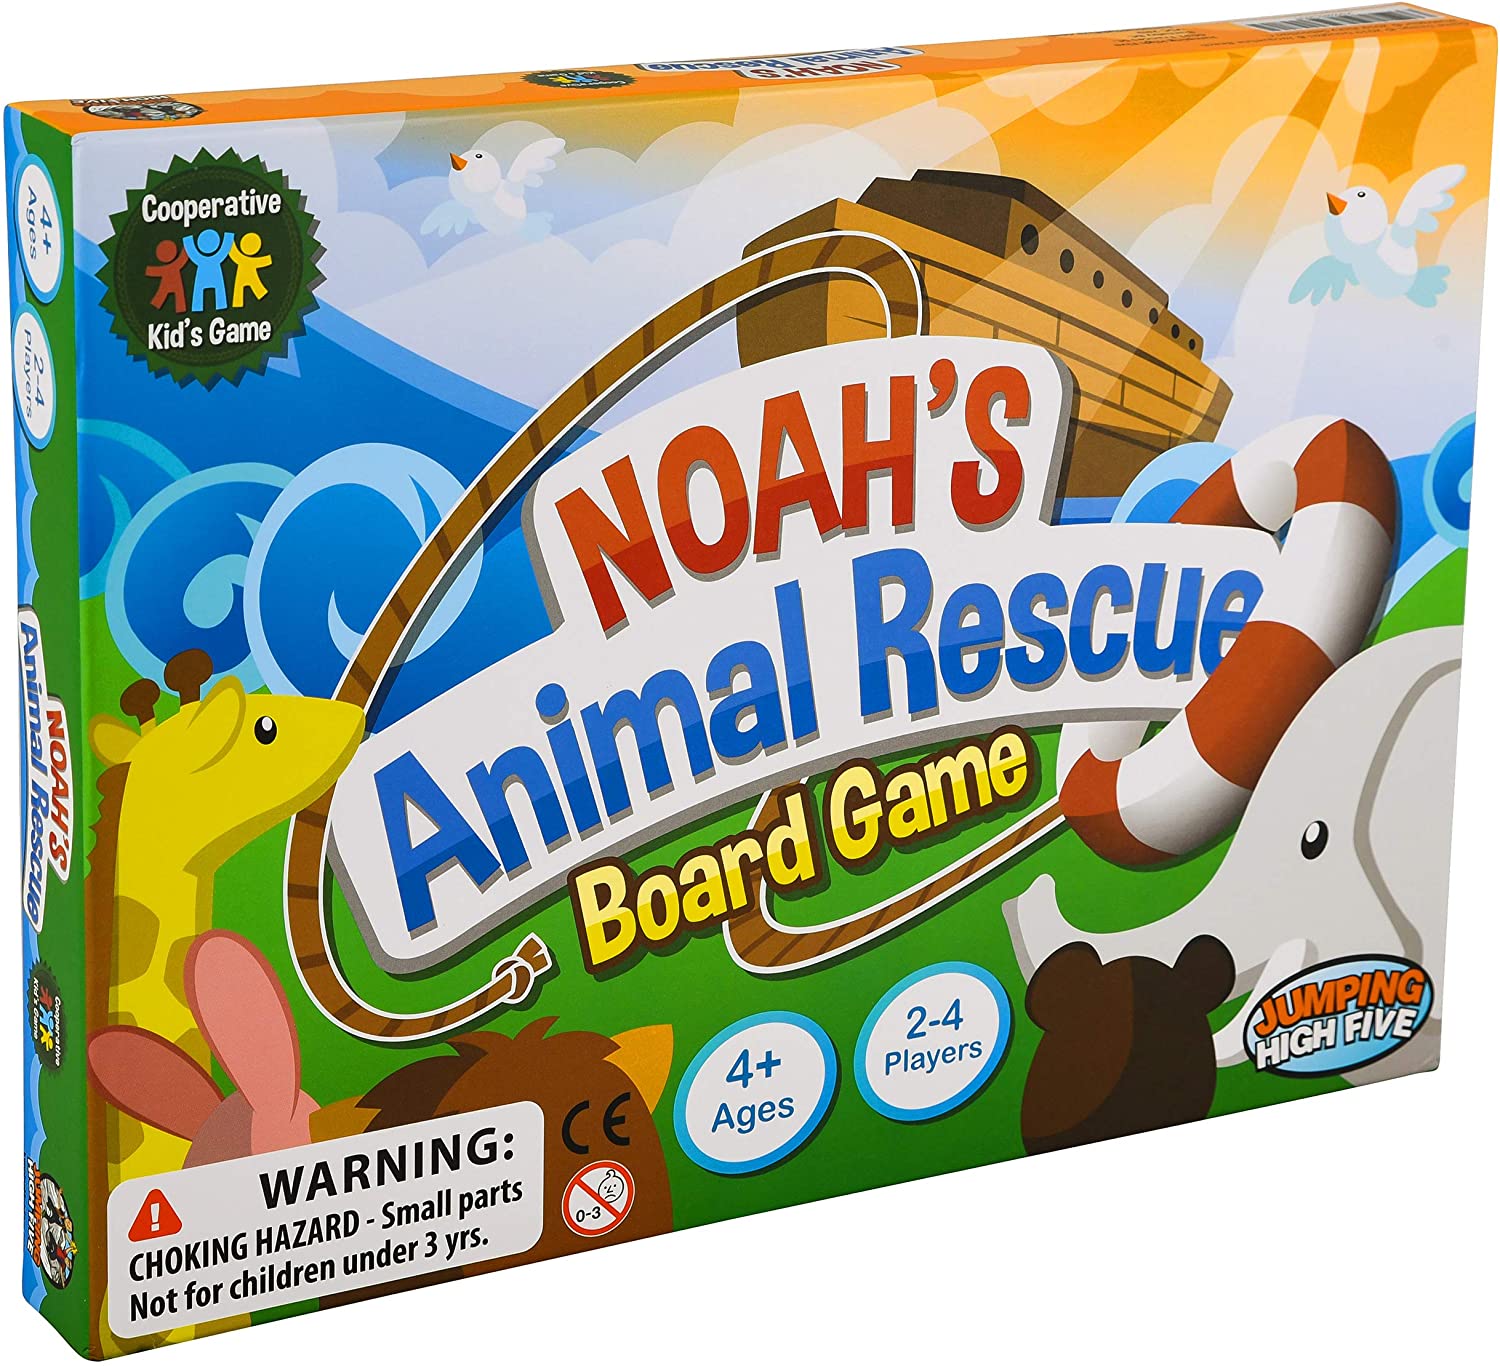 Jumping High Five Noah’s Animal Rescue! Team-Buliding Board Game For All Ages